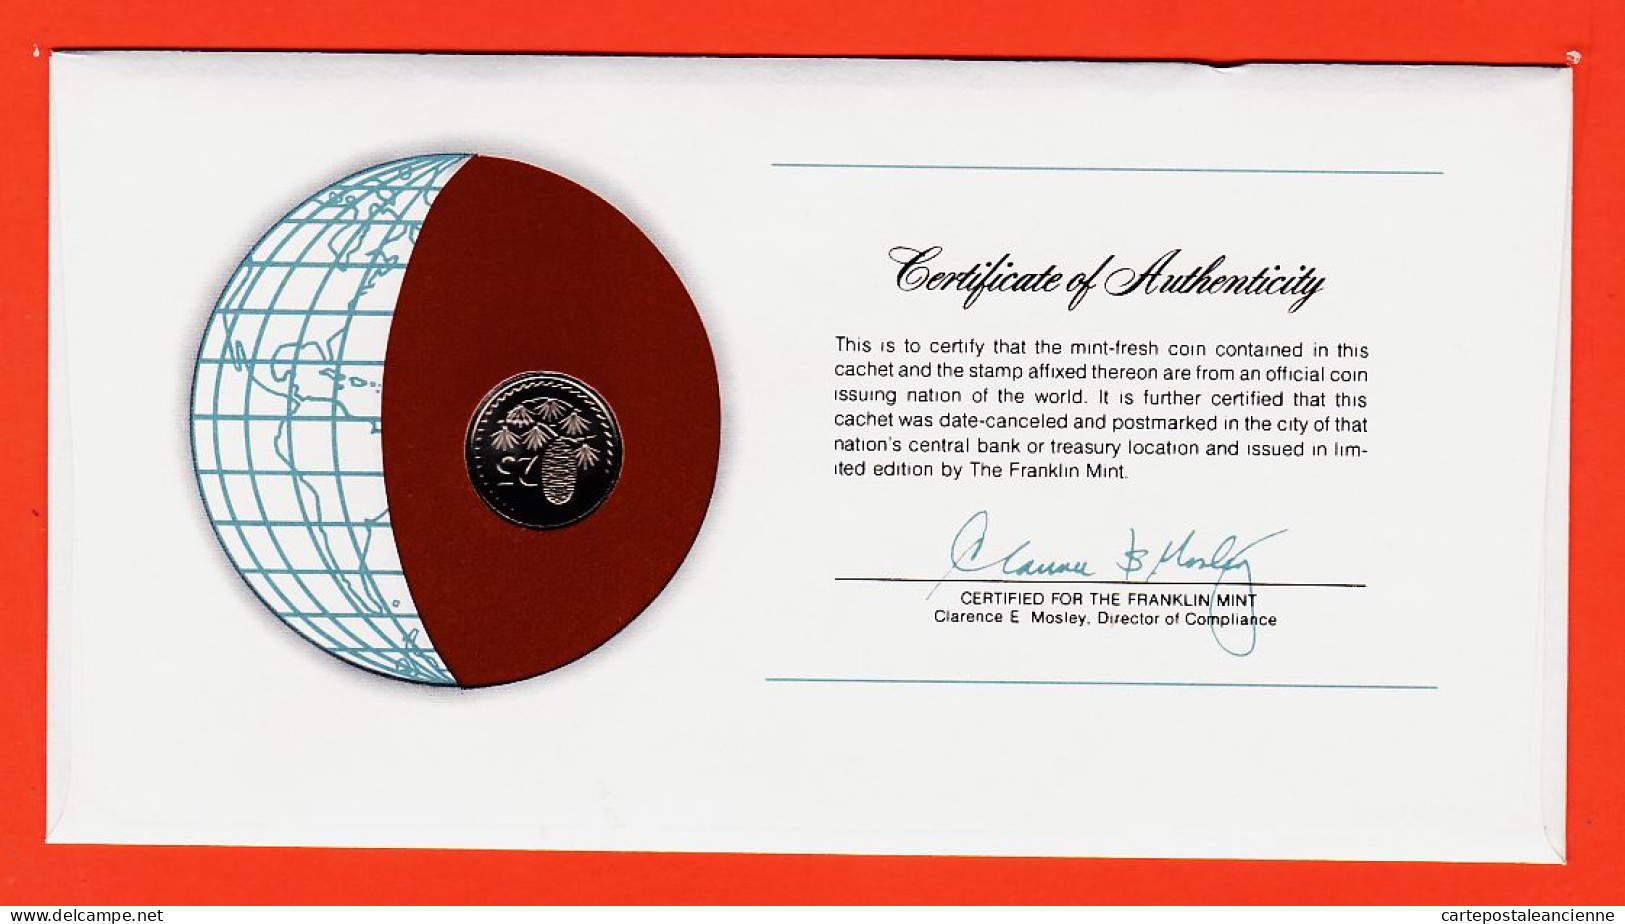 28293 / CYPRUS 25 Mils 1977 Chypre FRANKLIN MINT Coins Nations Coin Limited Edition Enveloppe Numismatique Numiscover - Cipro